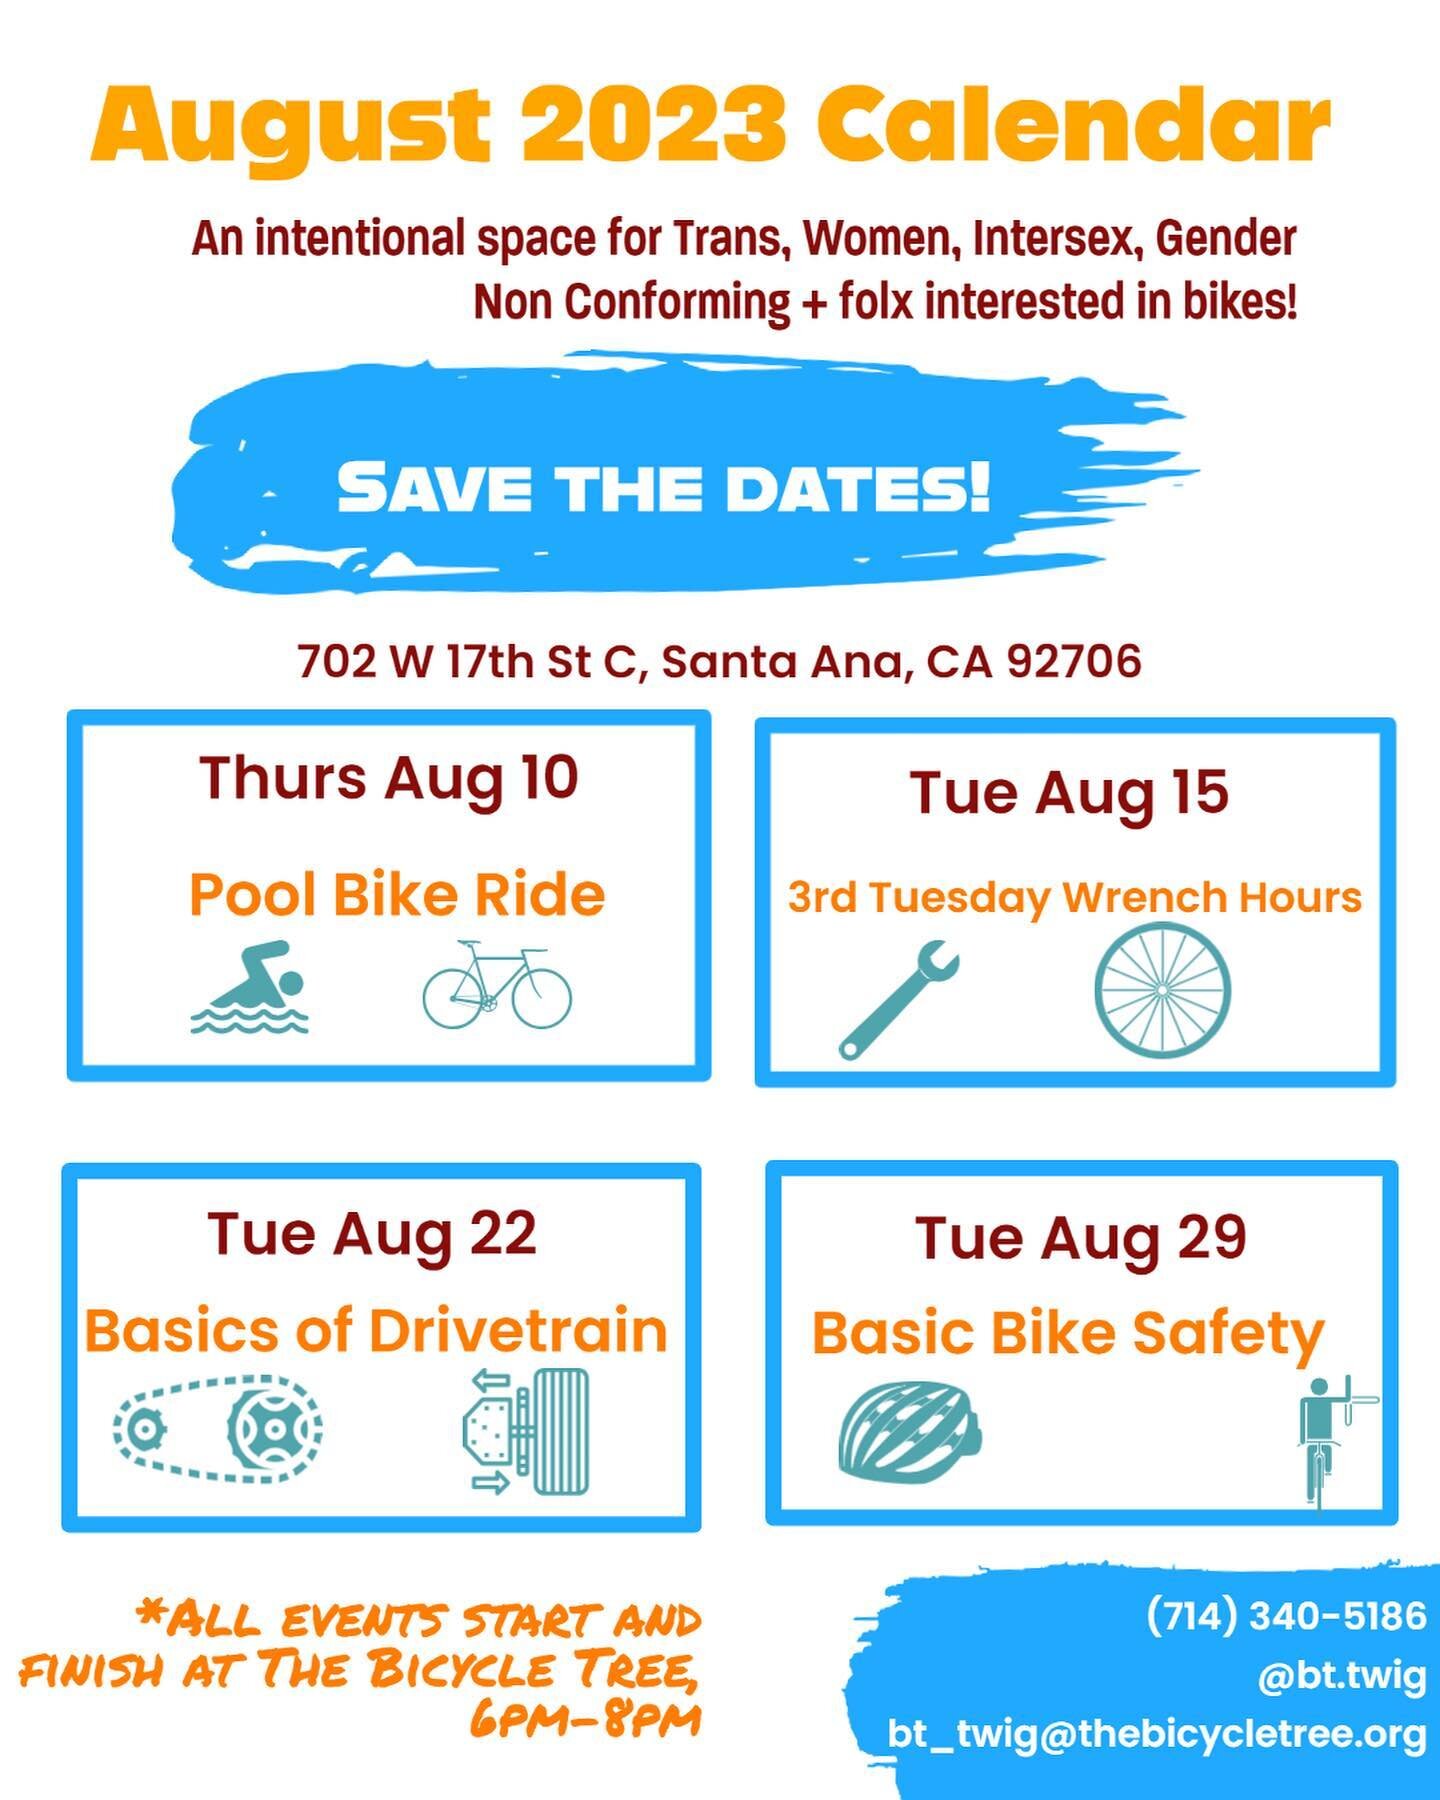 Catch us this month at The Bicycle Tree! Mark your calendars and join us for the Summer fun 🚲🚲🔧🩱🩳☀️

All events starts and finish at The Bicycle Tree, 702 WSt 17th St C Santa Ana ca 92706, from 6pm-8pm

An intentional space for Trans, Women, Int